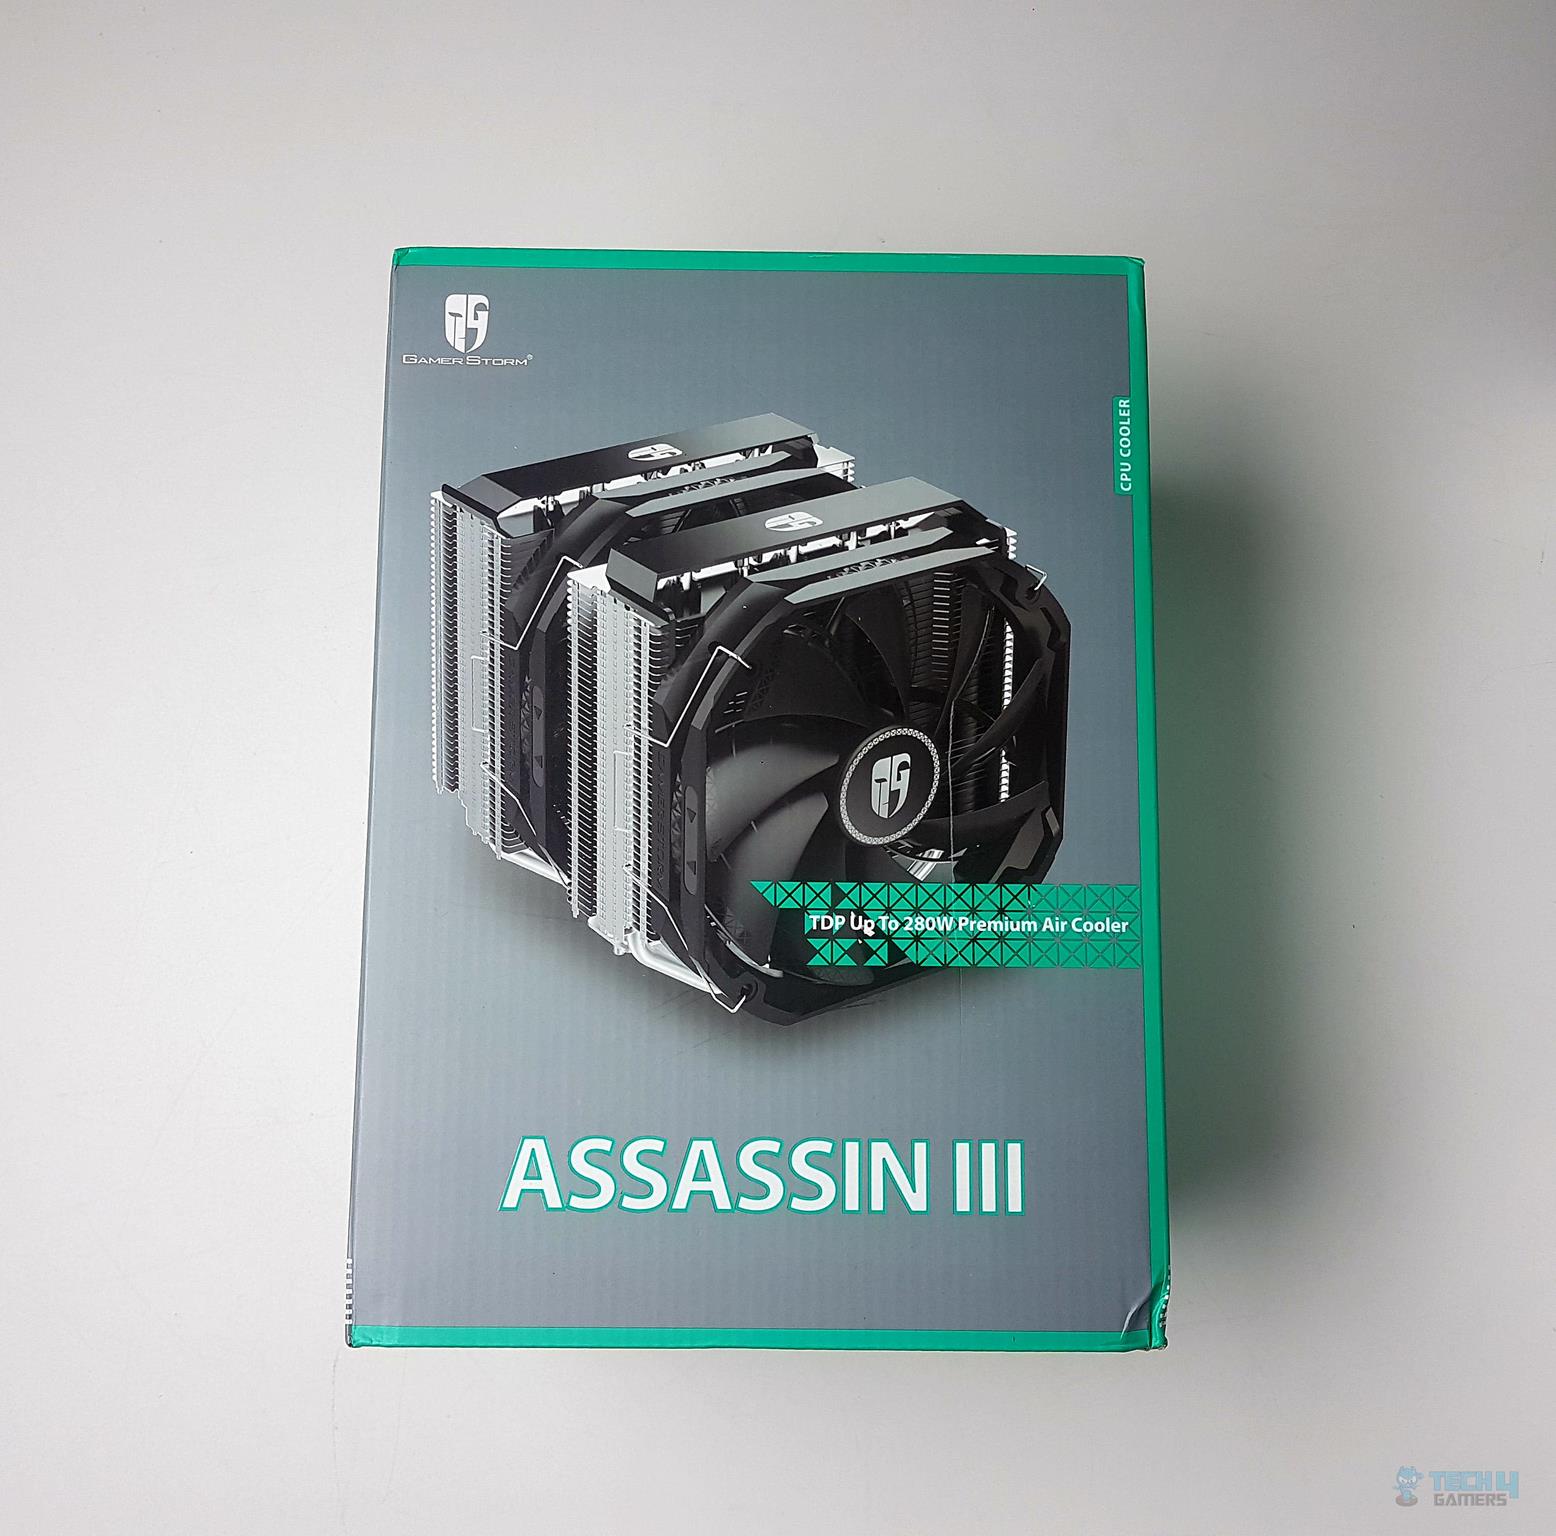 Packaging and Unboxing of Deepcool Assassin III